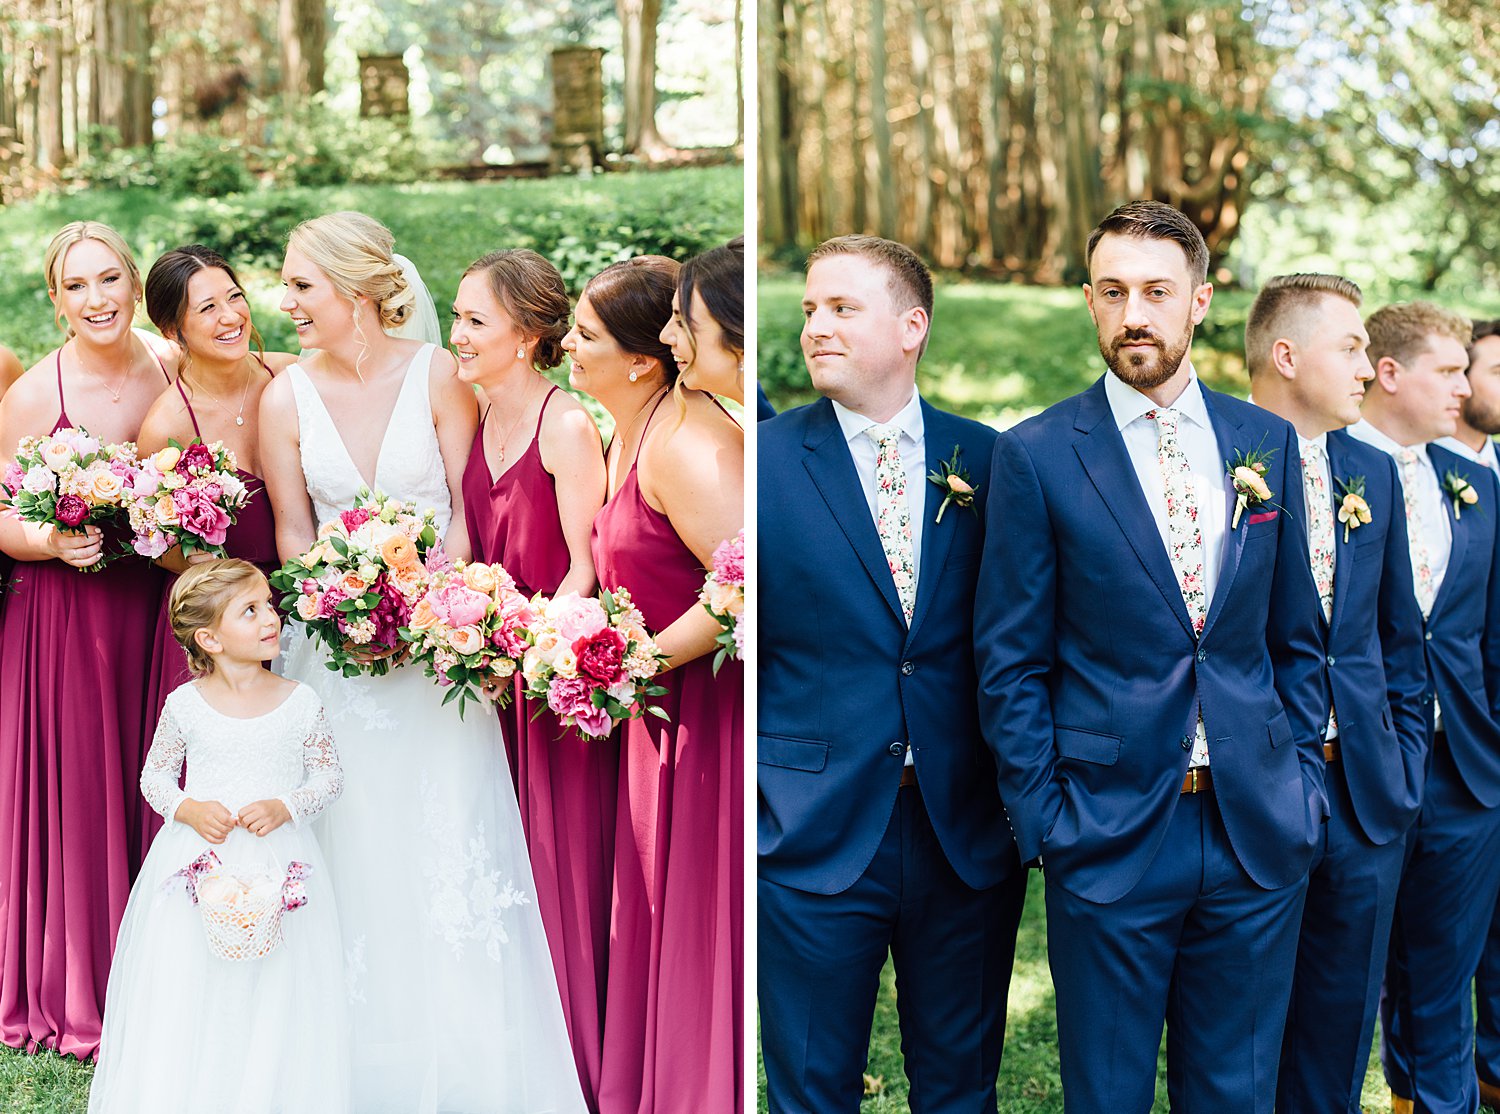 Bridal party, bridesmaids, groomsmen, parque at ridley creek state park